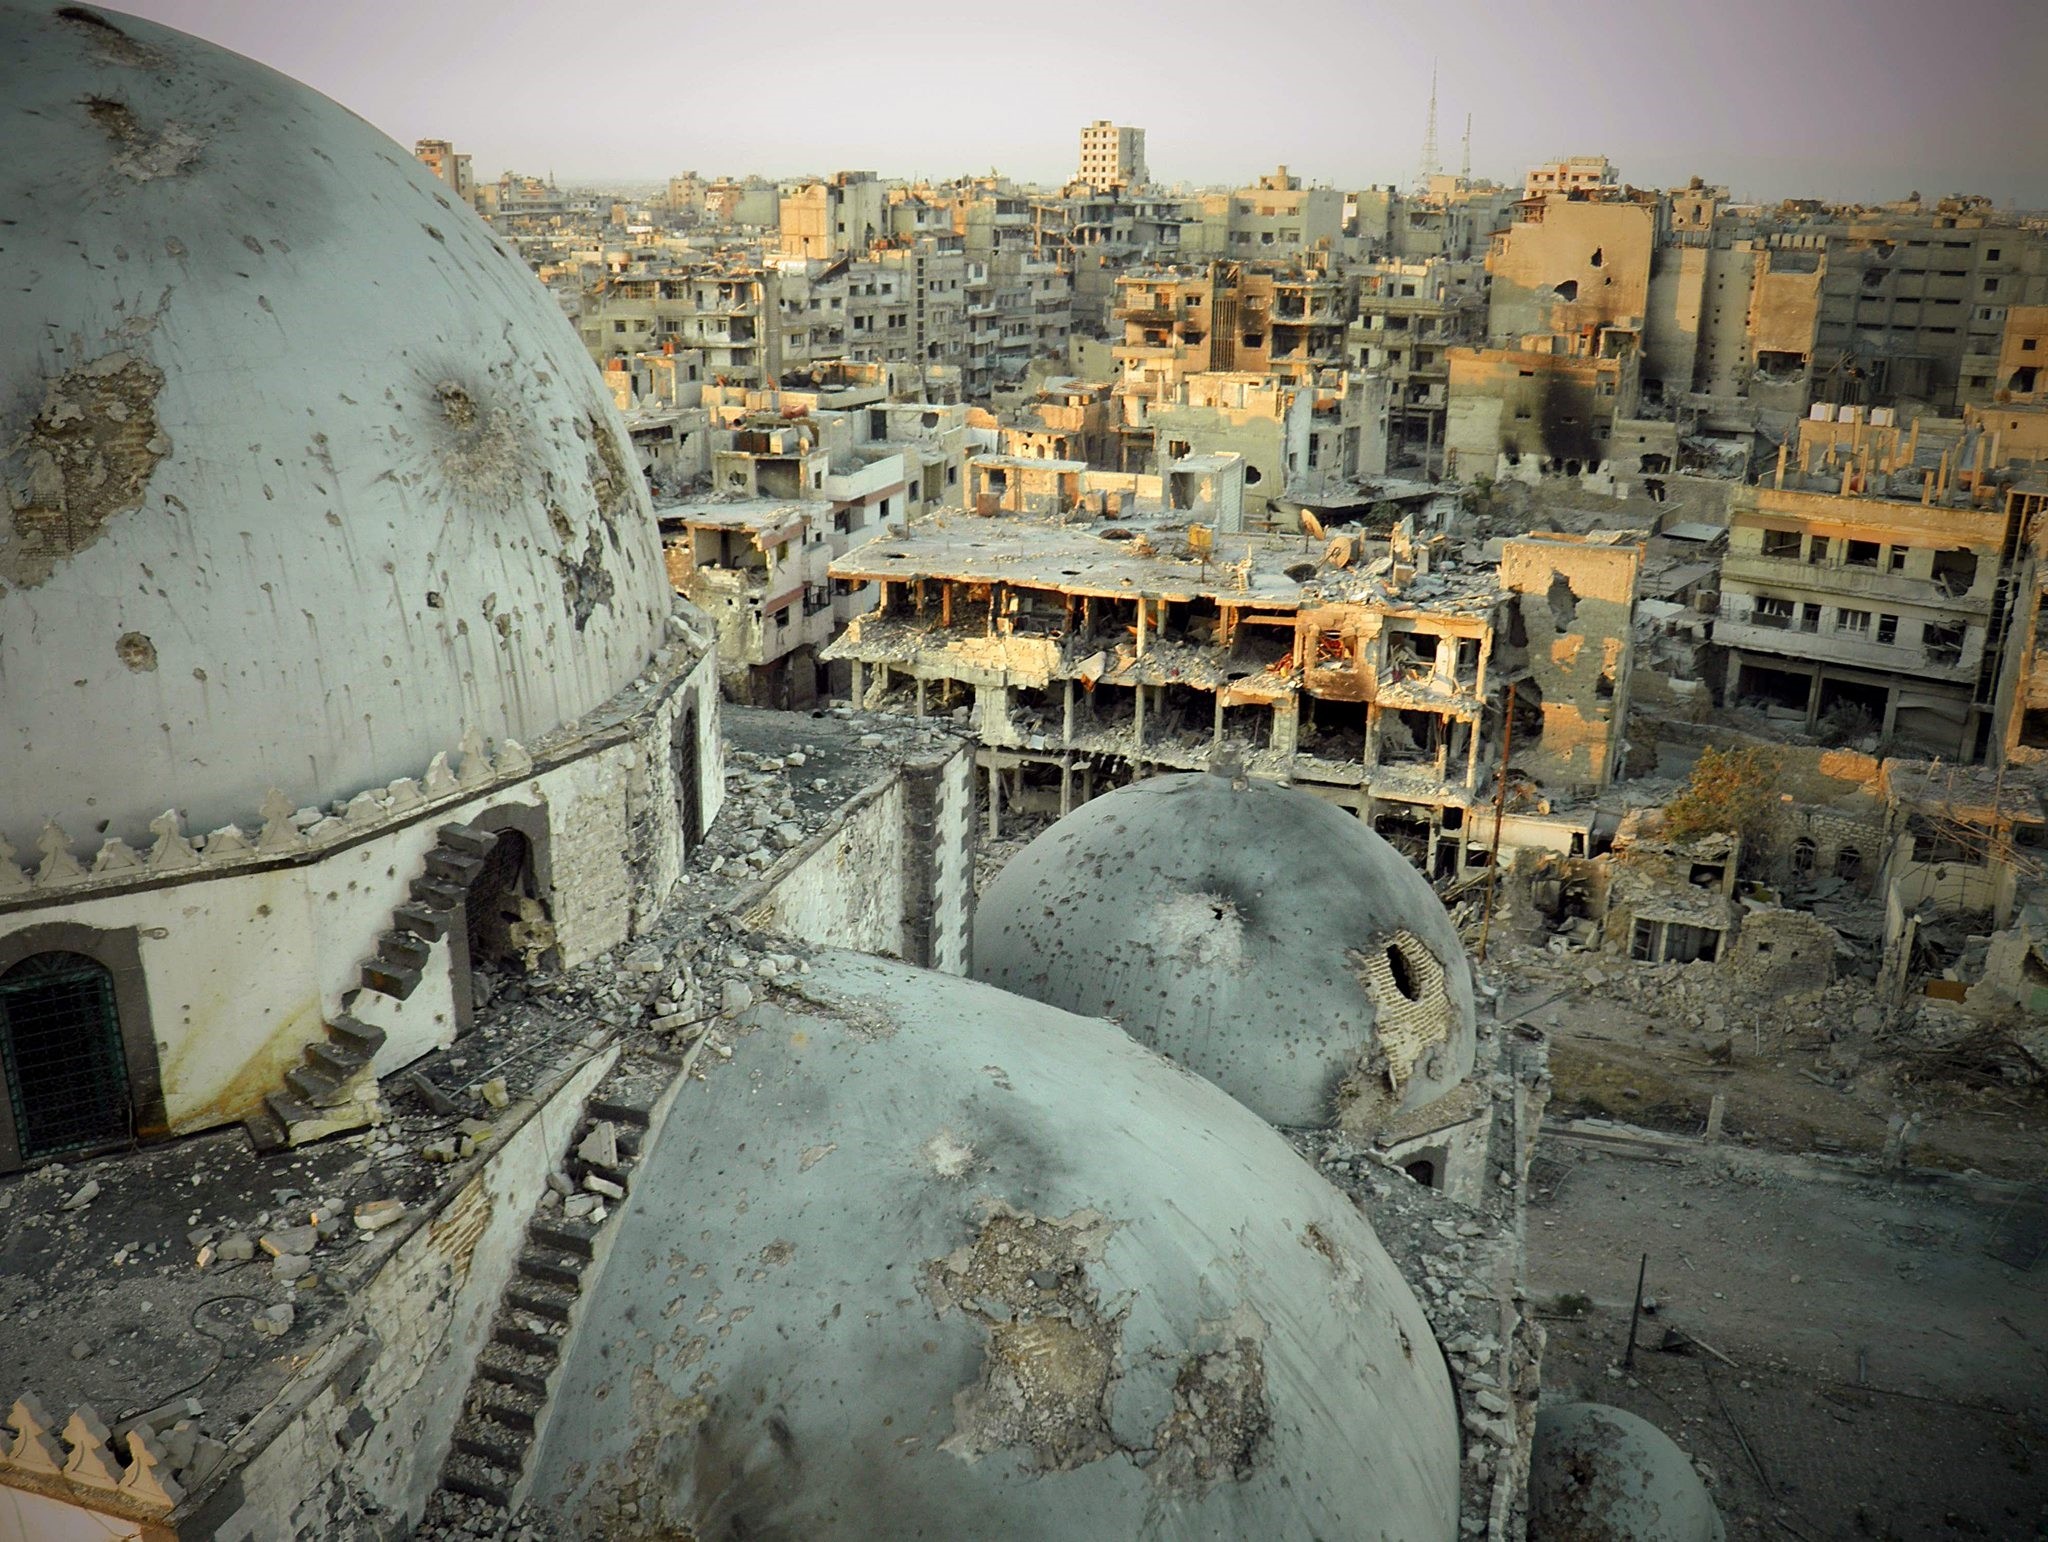 The Khalid ibn al-Walid Mosque seen after being partially destroyed in clashes during the Syrian civil war, Homs province, Syria, July 25, 2013.